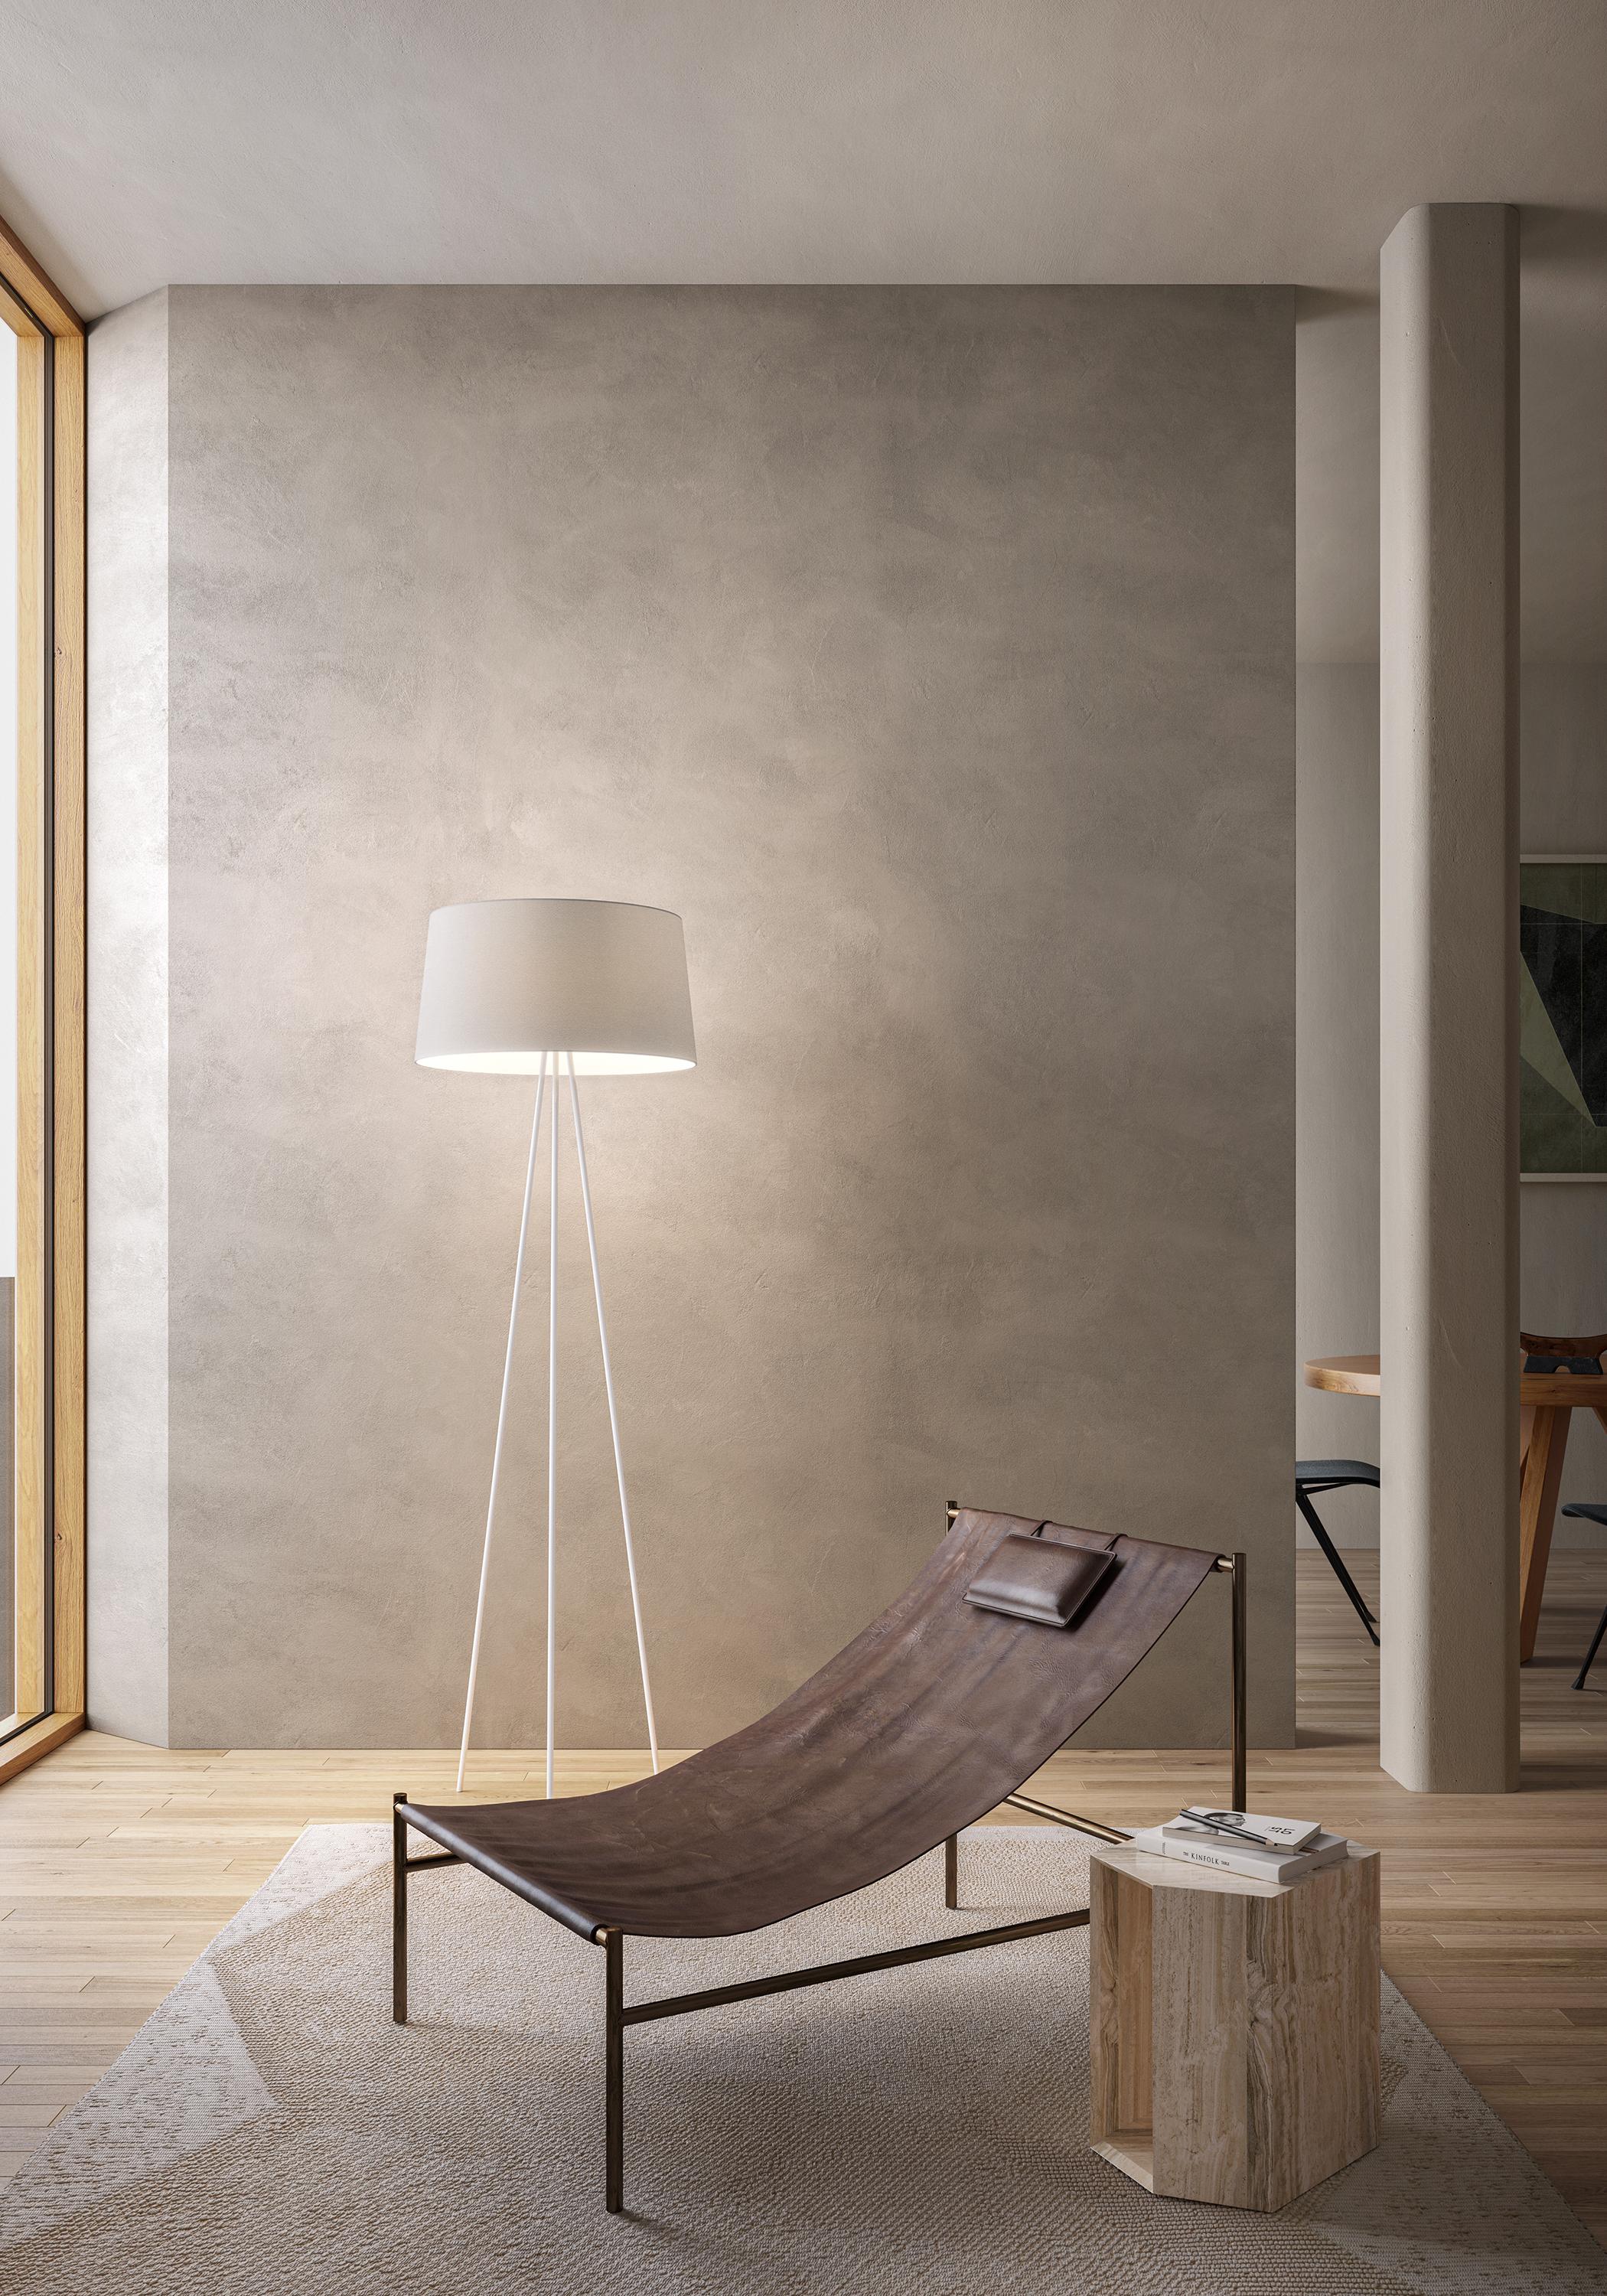 Tripod floor white finish

The modular elements of the most classic of lamps become basic and exclusive. Three simple lines for the support and straightforward volume for the fabric lampshade. An ethereal, refined and timeless object. Floor lamp,